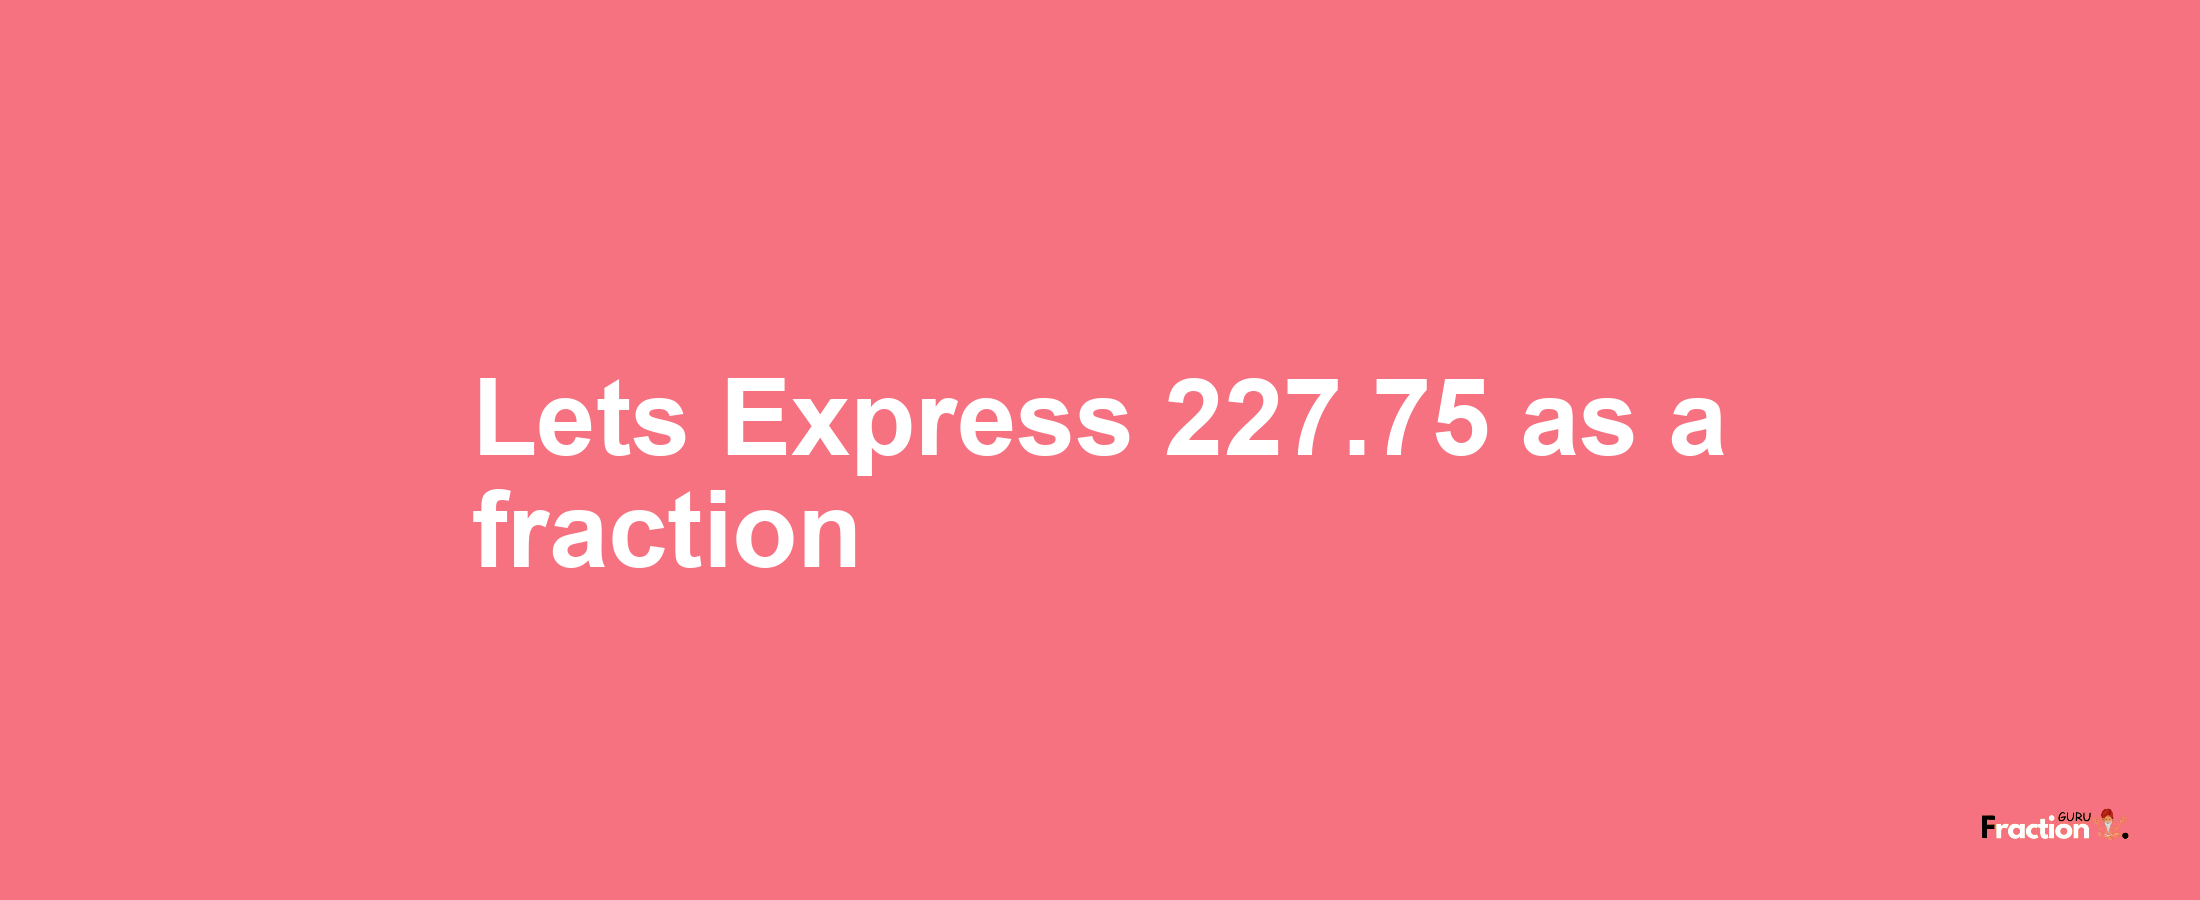 Lets Express 227.75 as afraction